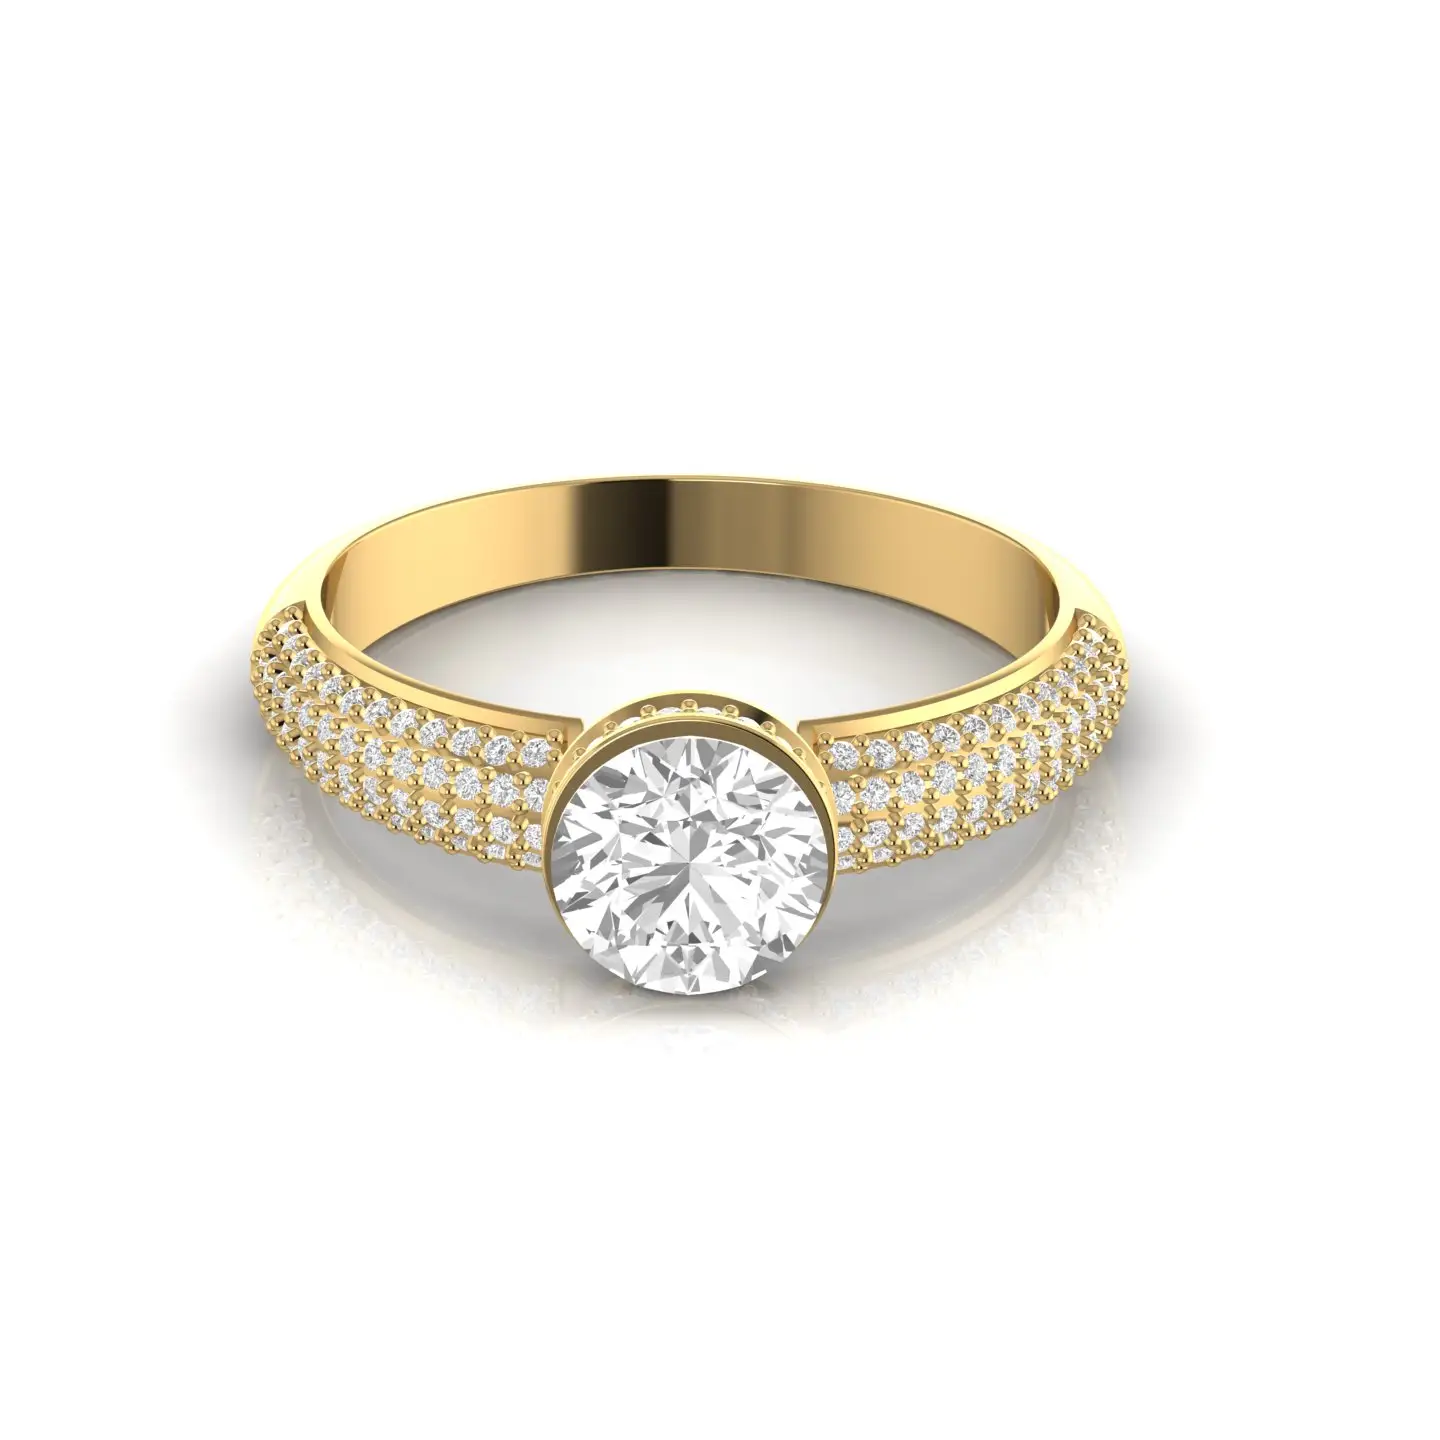 1.63 CT Diamond Cocktail 14KT Solid Gold Engagement Ring Fine Jewelry For Women